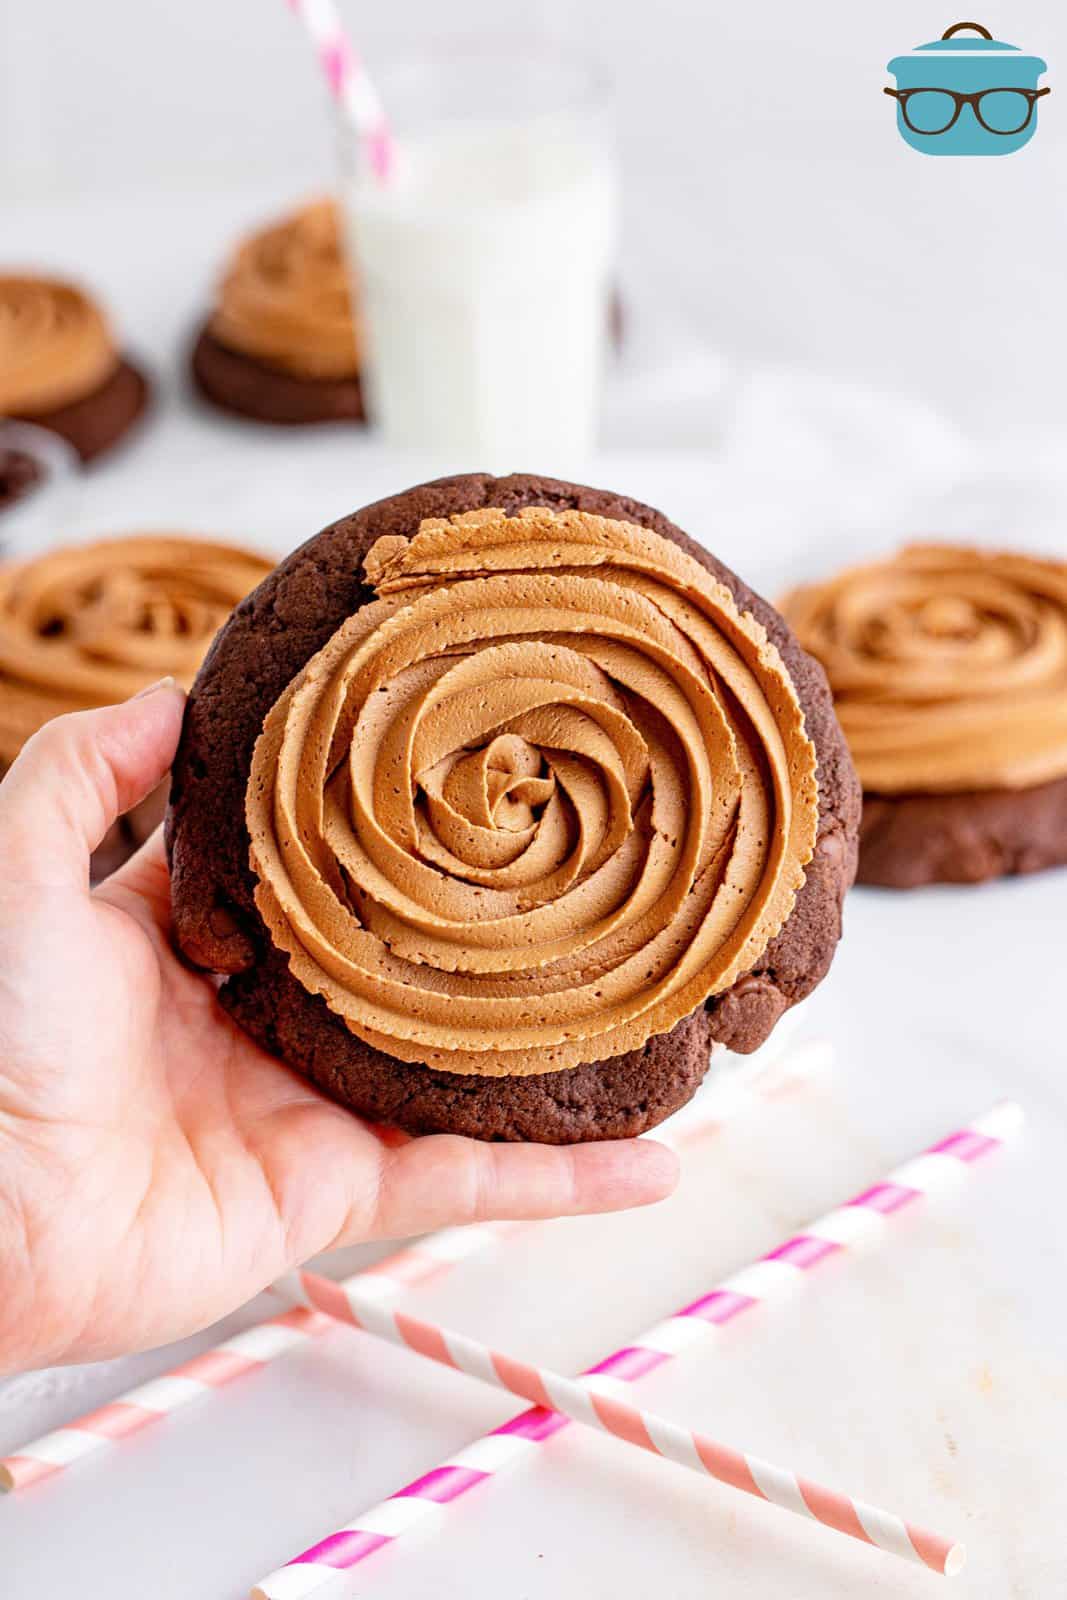 A chocolate frosted chocolate cake cookie.